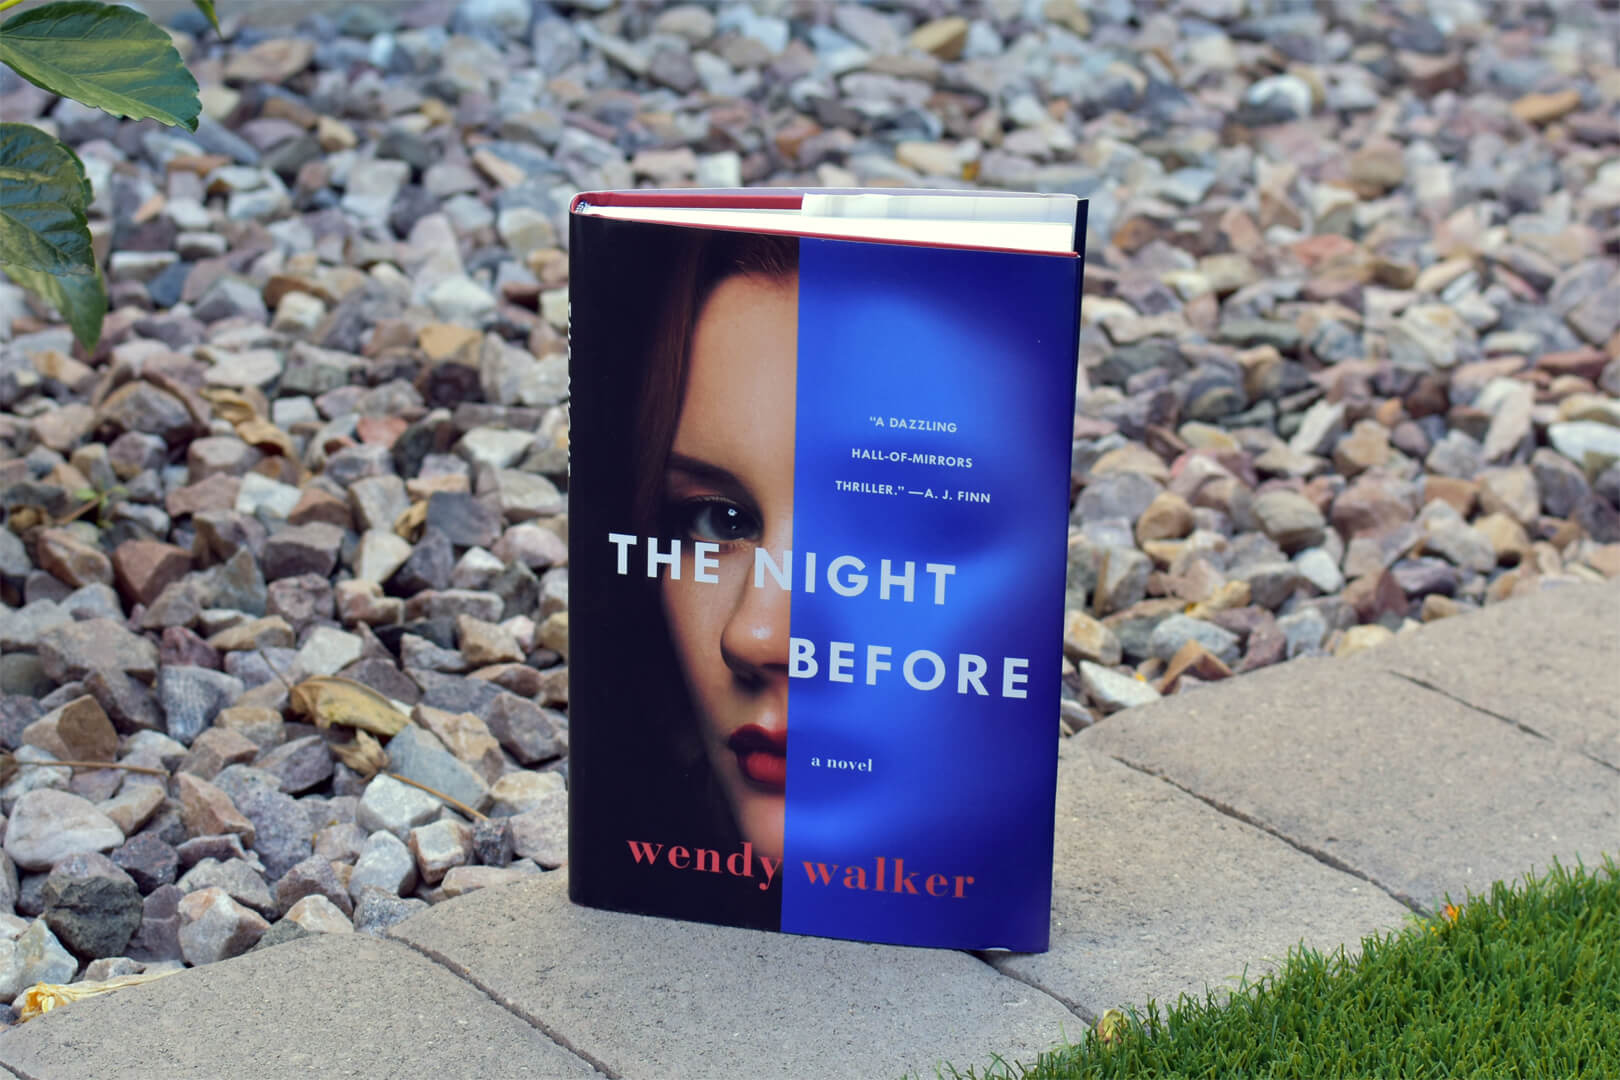 Review: The Night Before by Wendy Walker